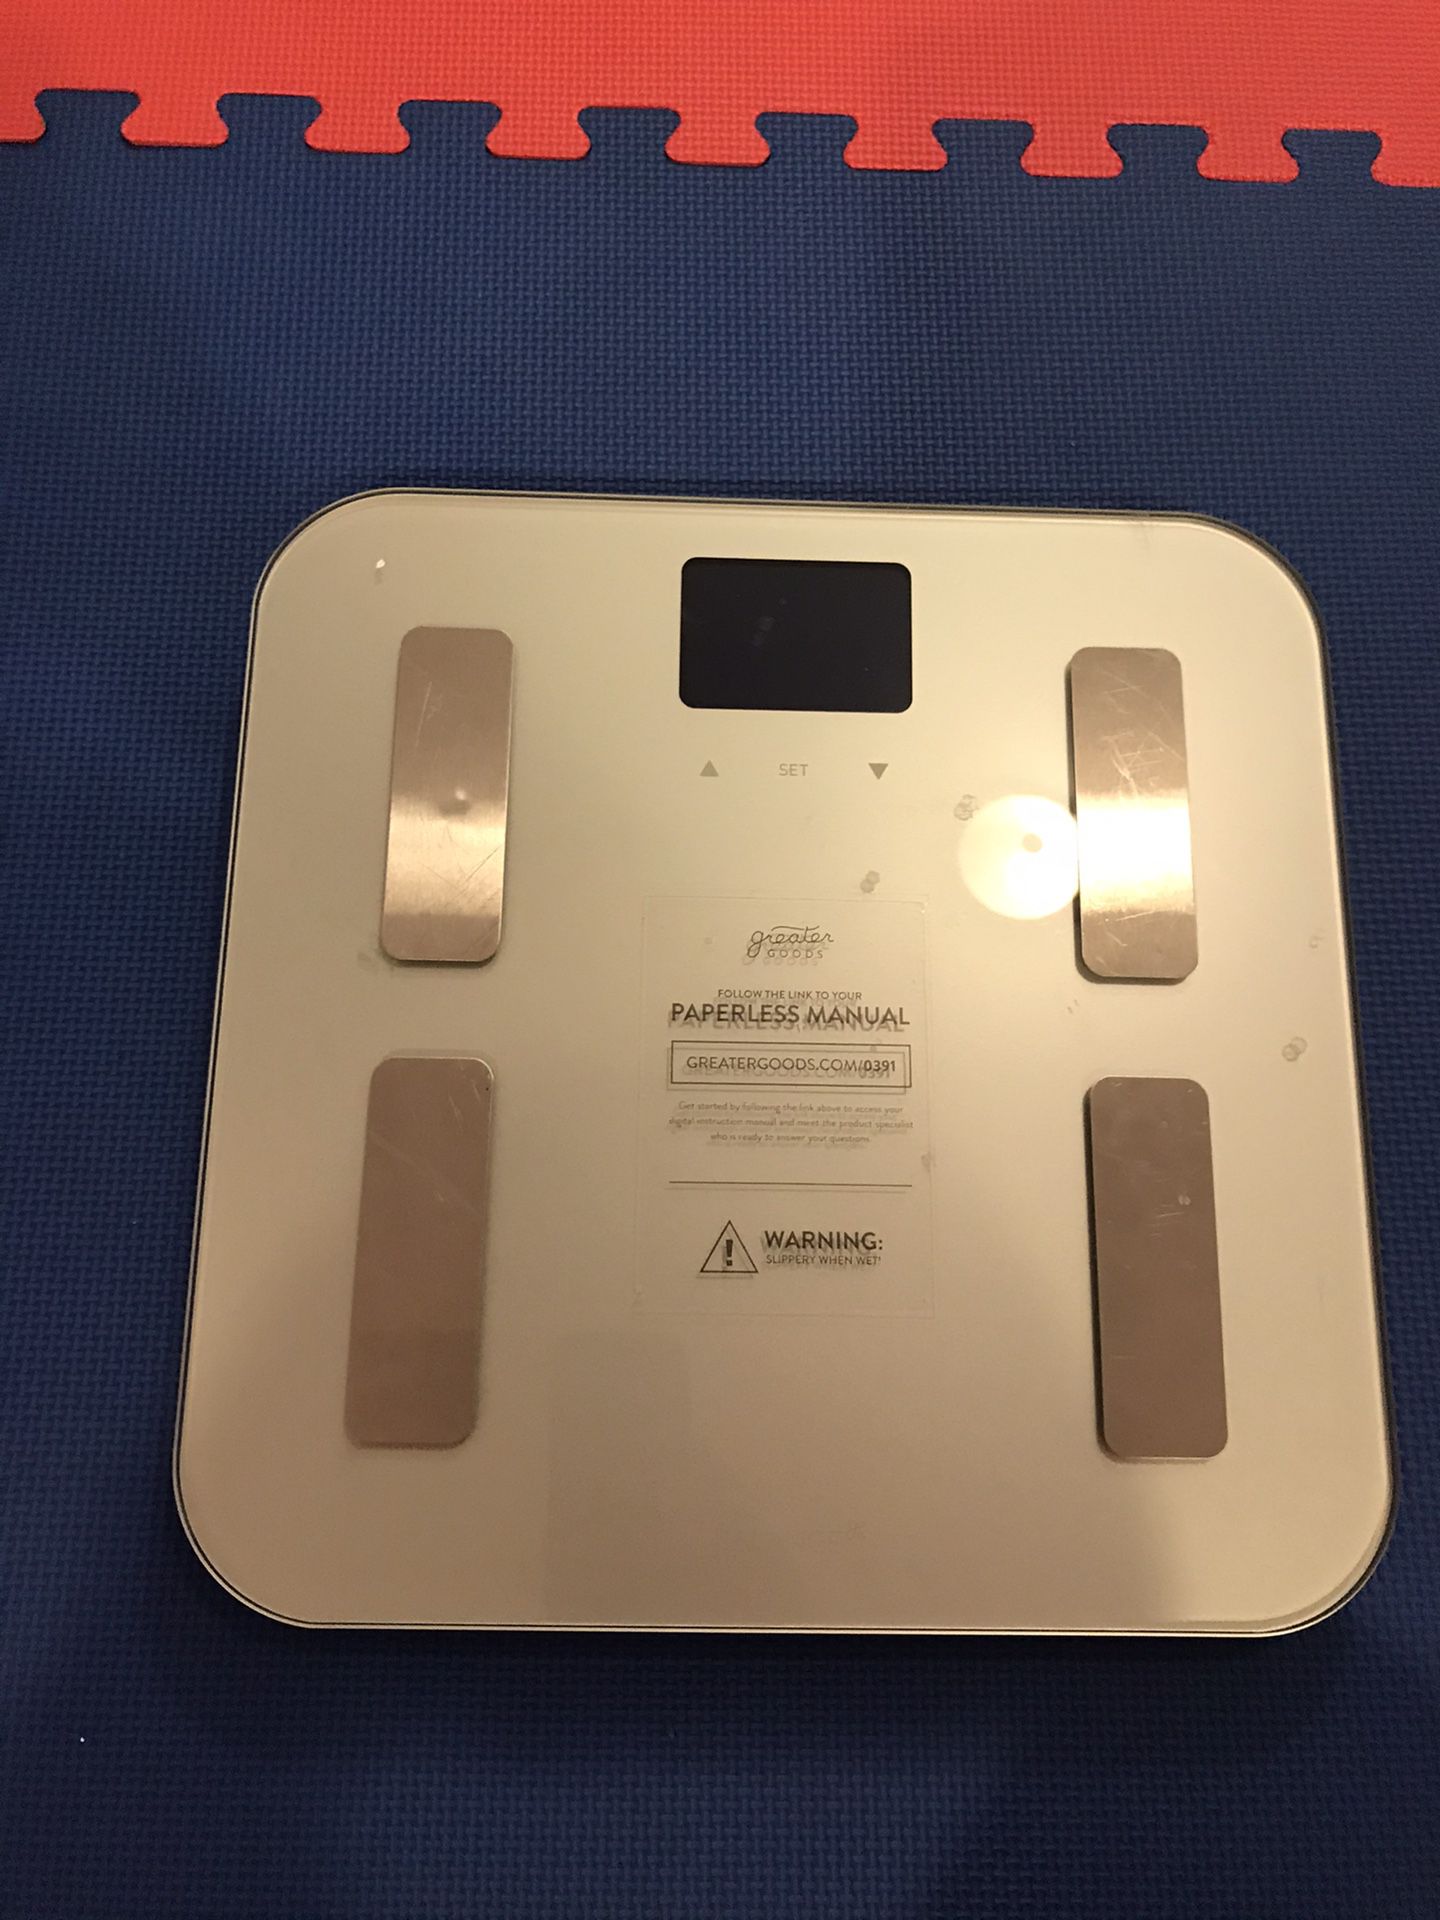 Scale that measures weight and body composition